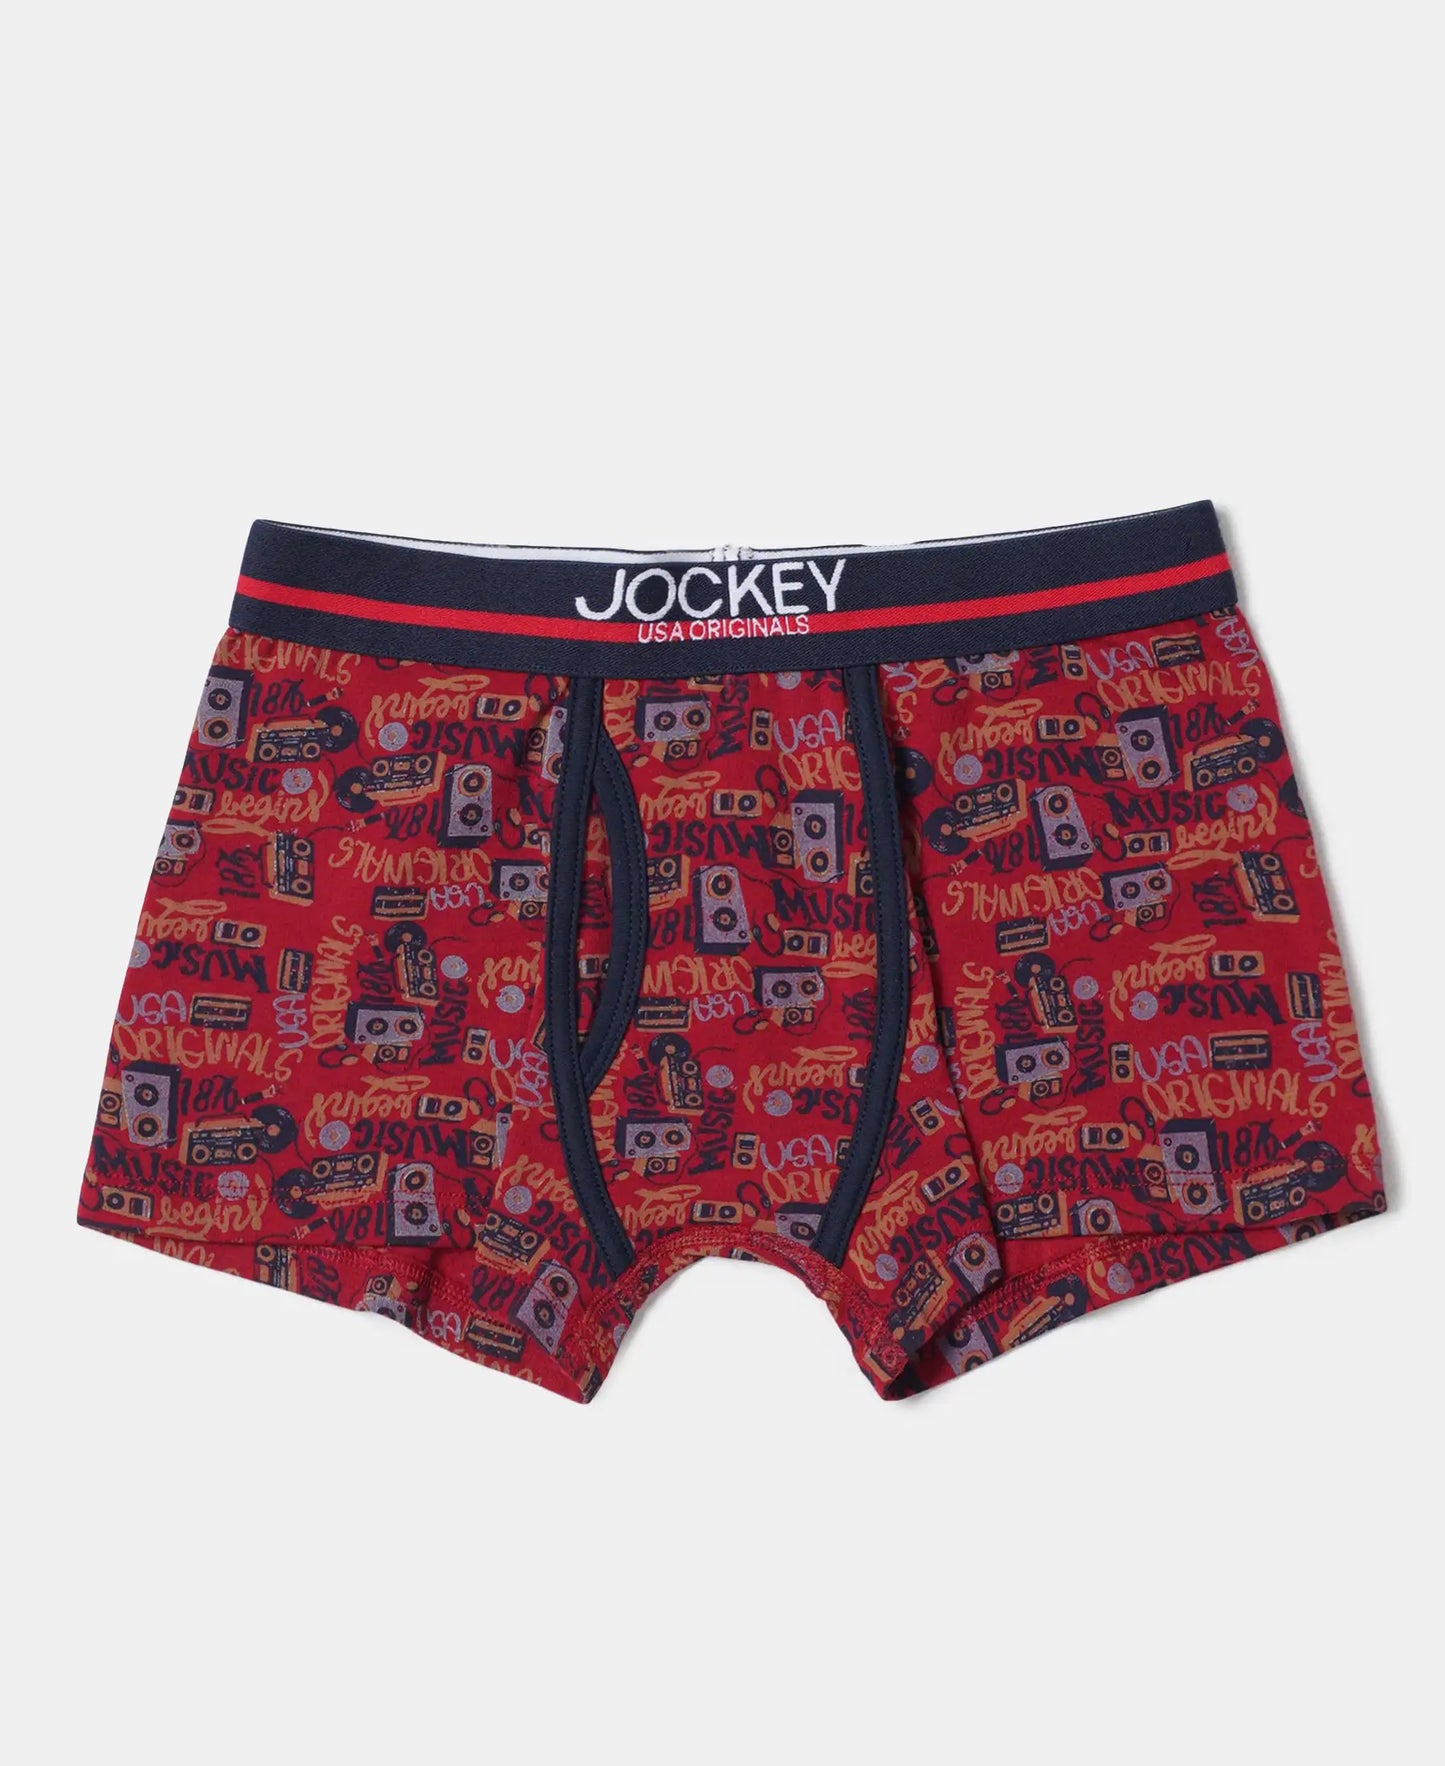 Super Combed Cotton Elastane Printed Trunk with Ultrasoft Waistband - Assorted-9